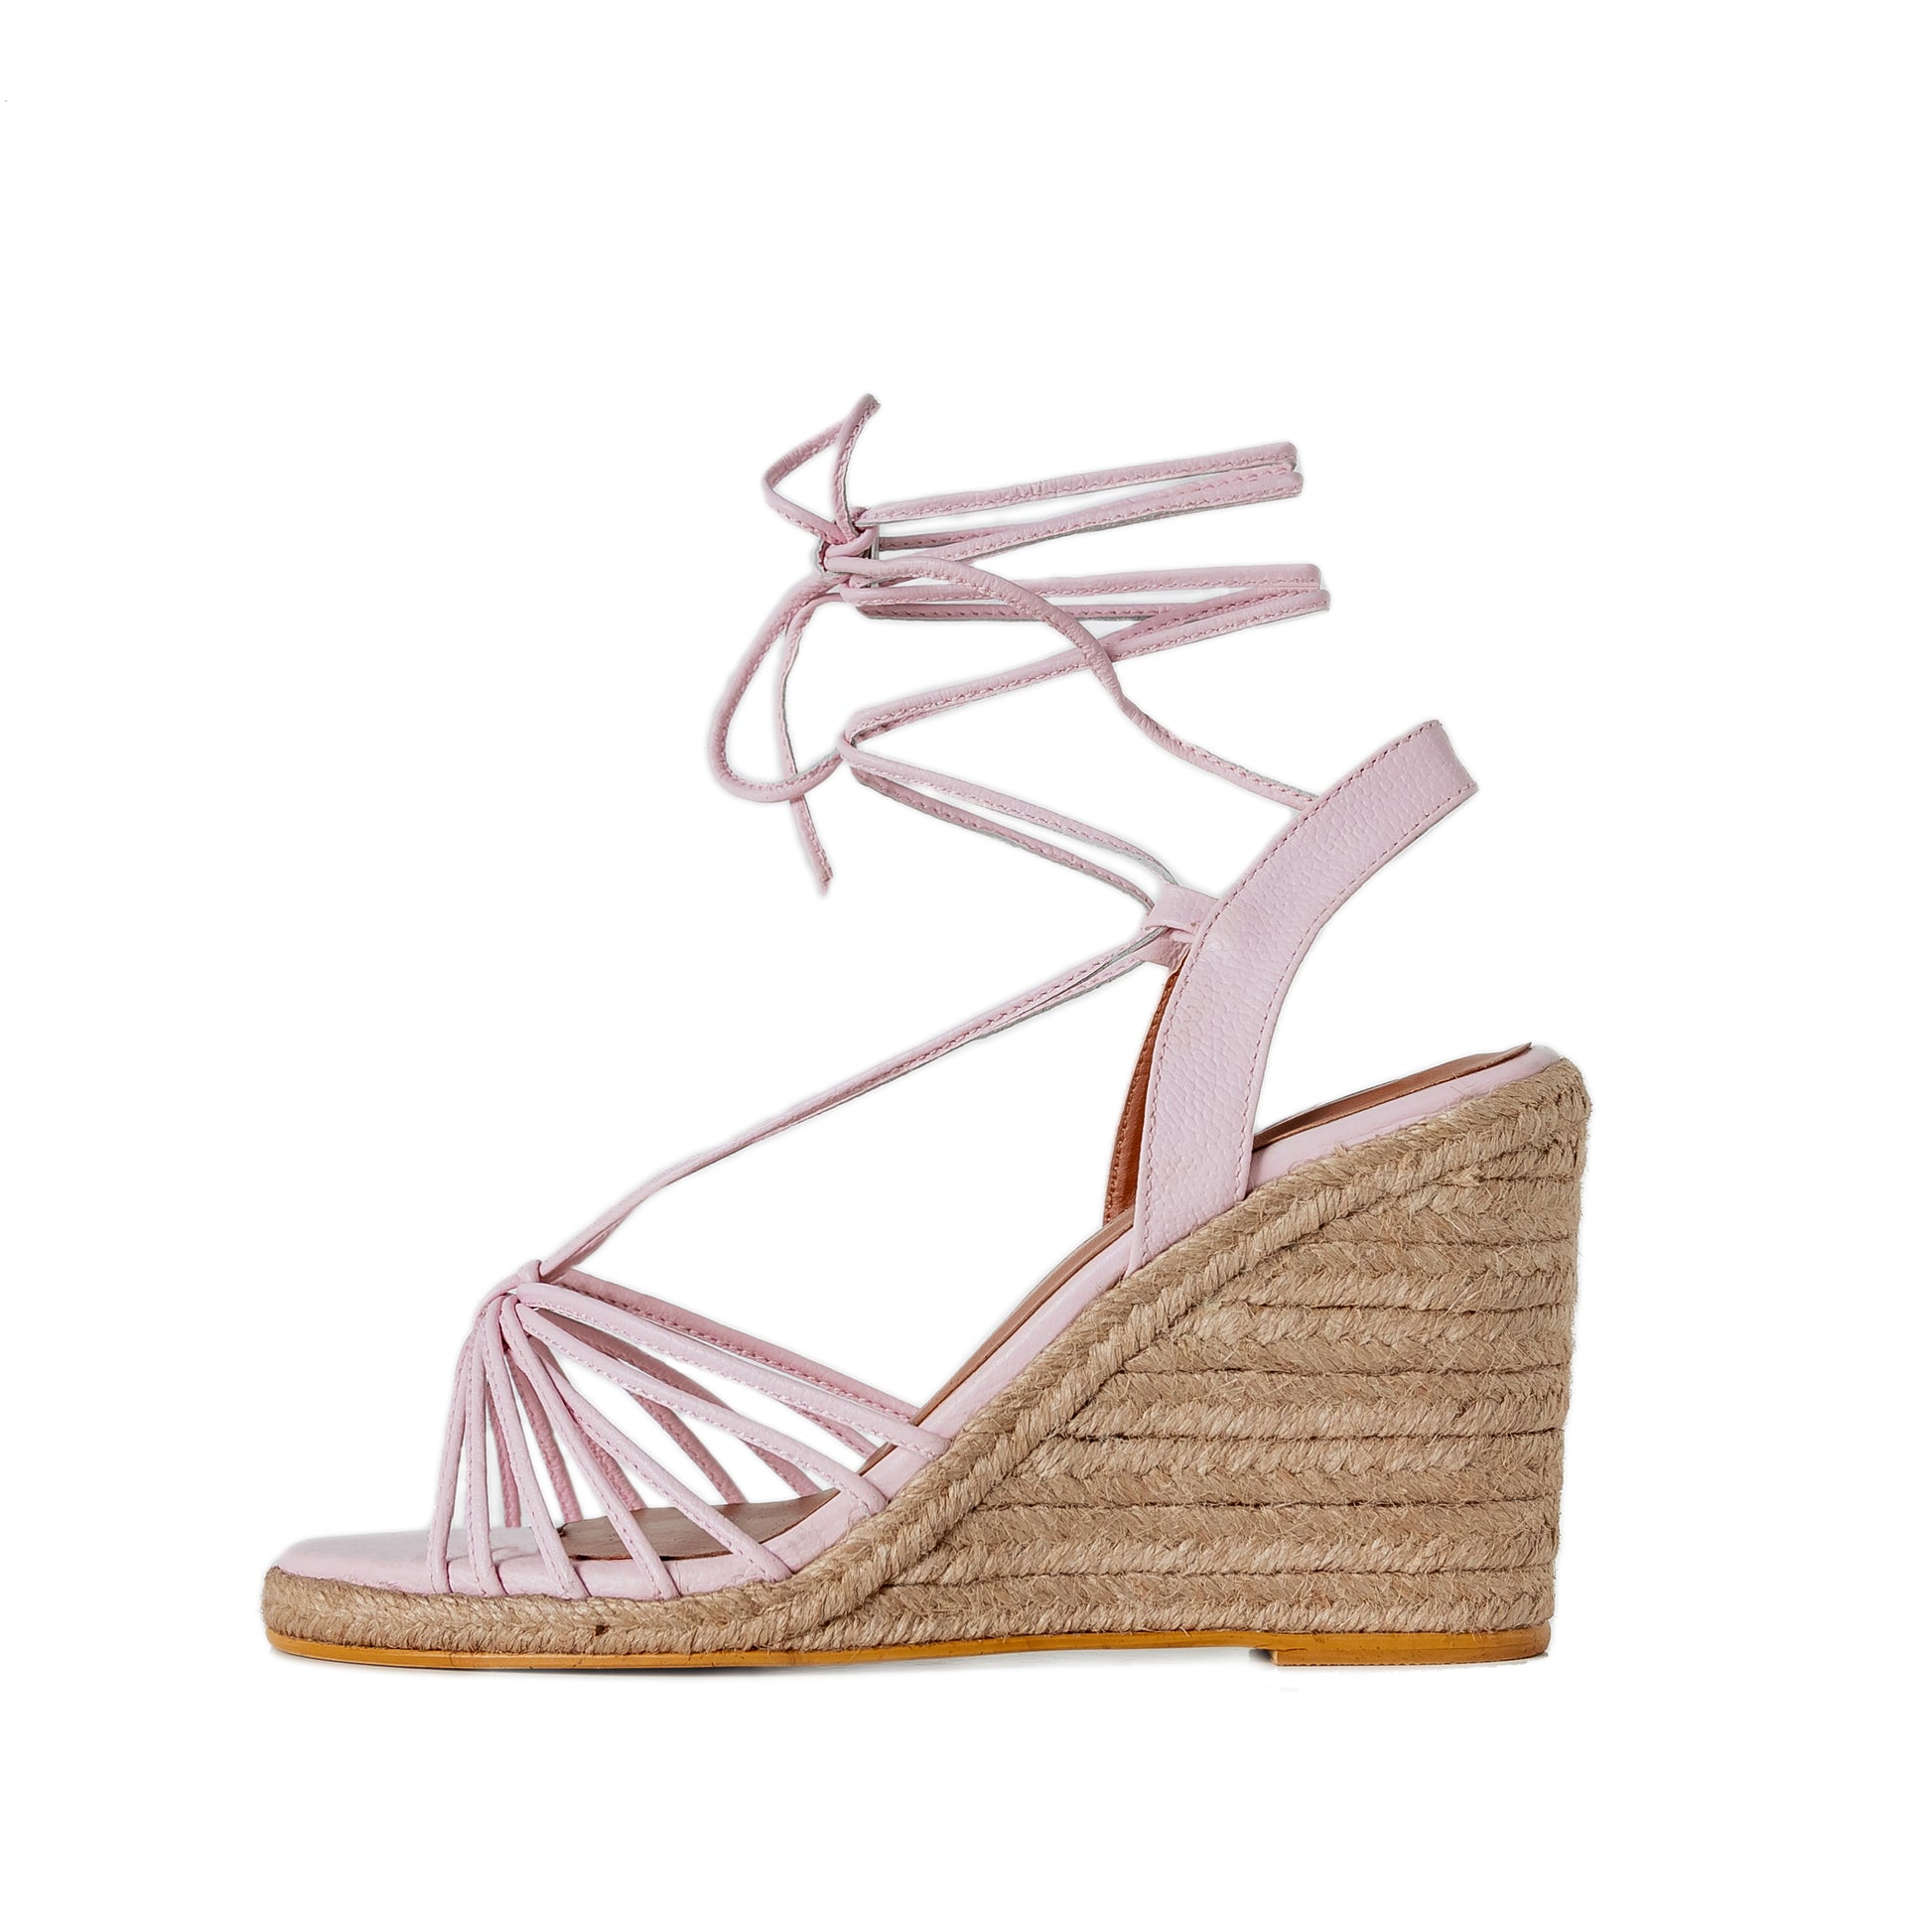 Titi Espadrilles Ligh Pink by Nataly Mendez. Its base is lined with natural fique Genuine Leather on the upper. Insole made of leather. Pronounced arch. Handmade 3.5 inch heel height 0.5 inch platform